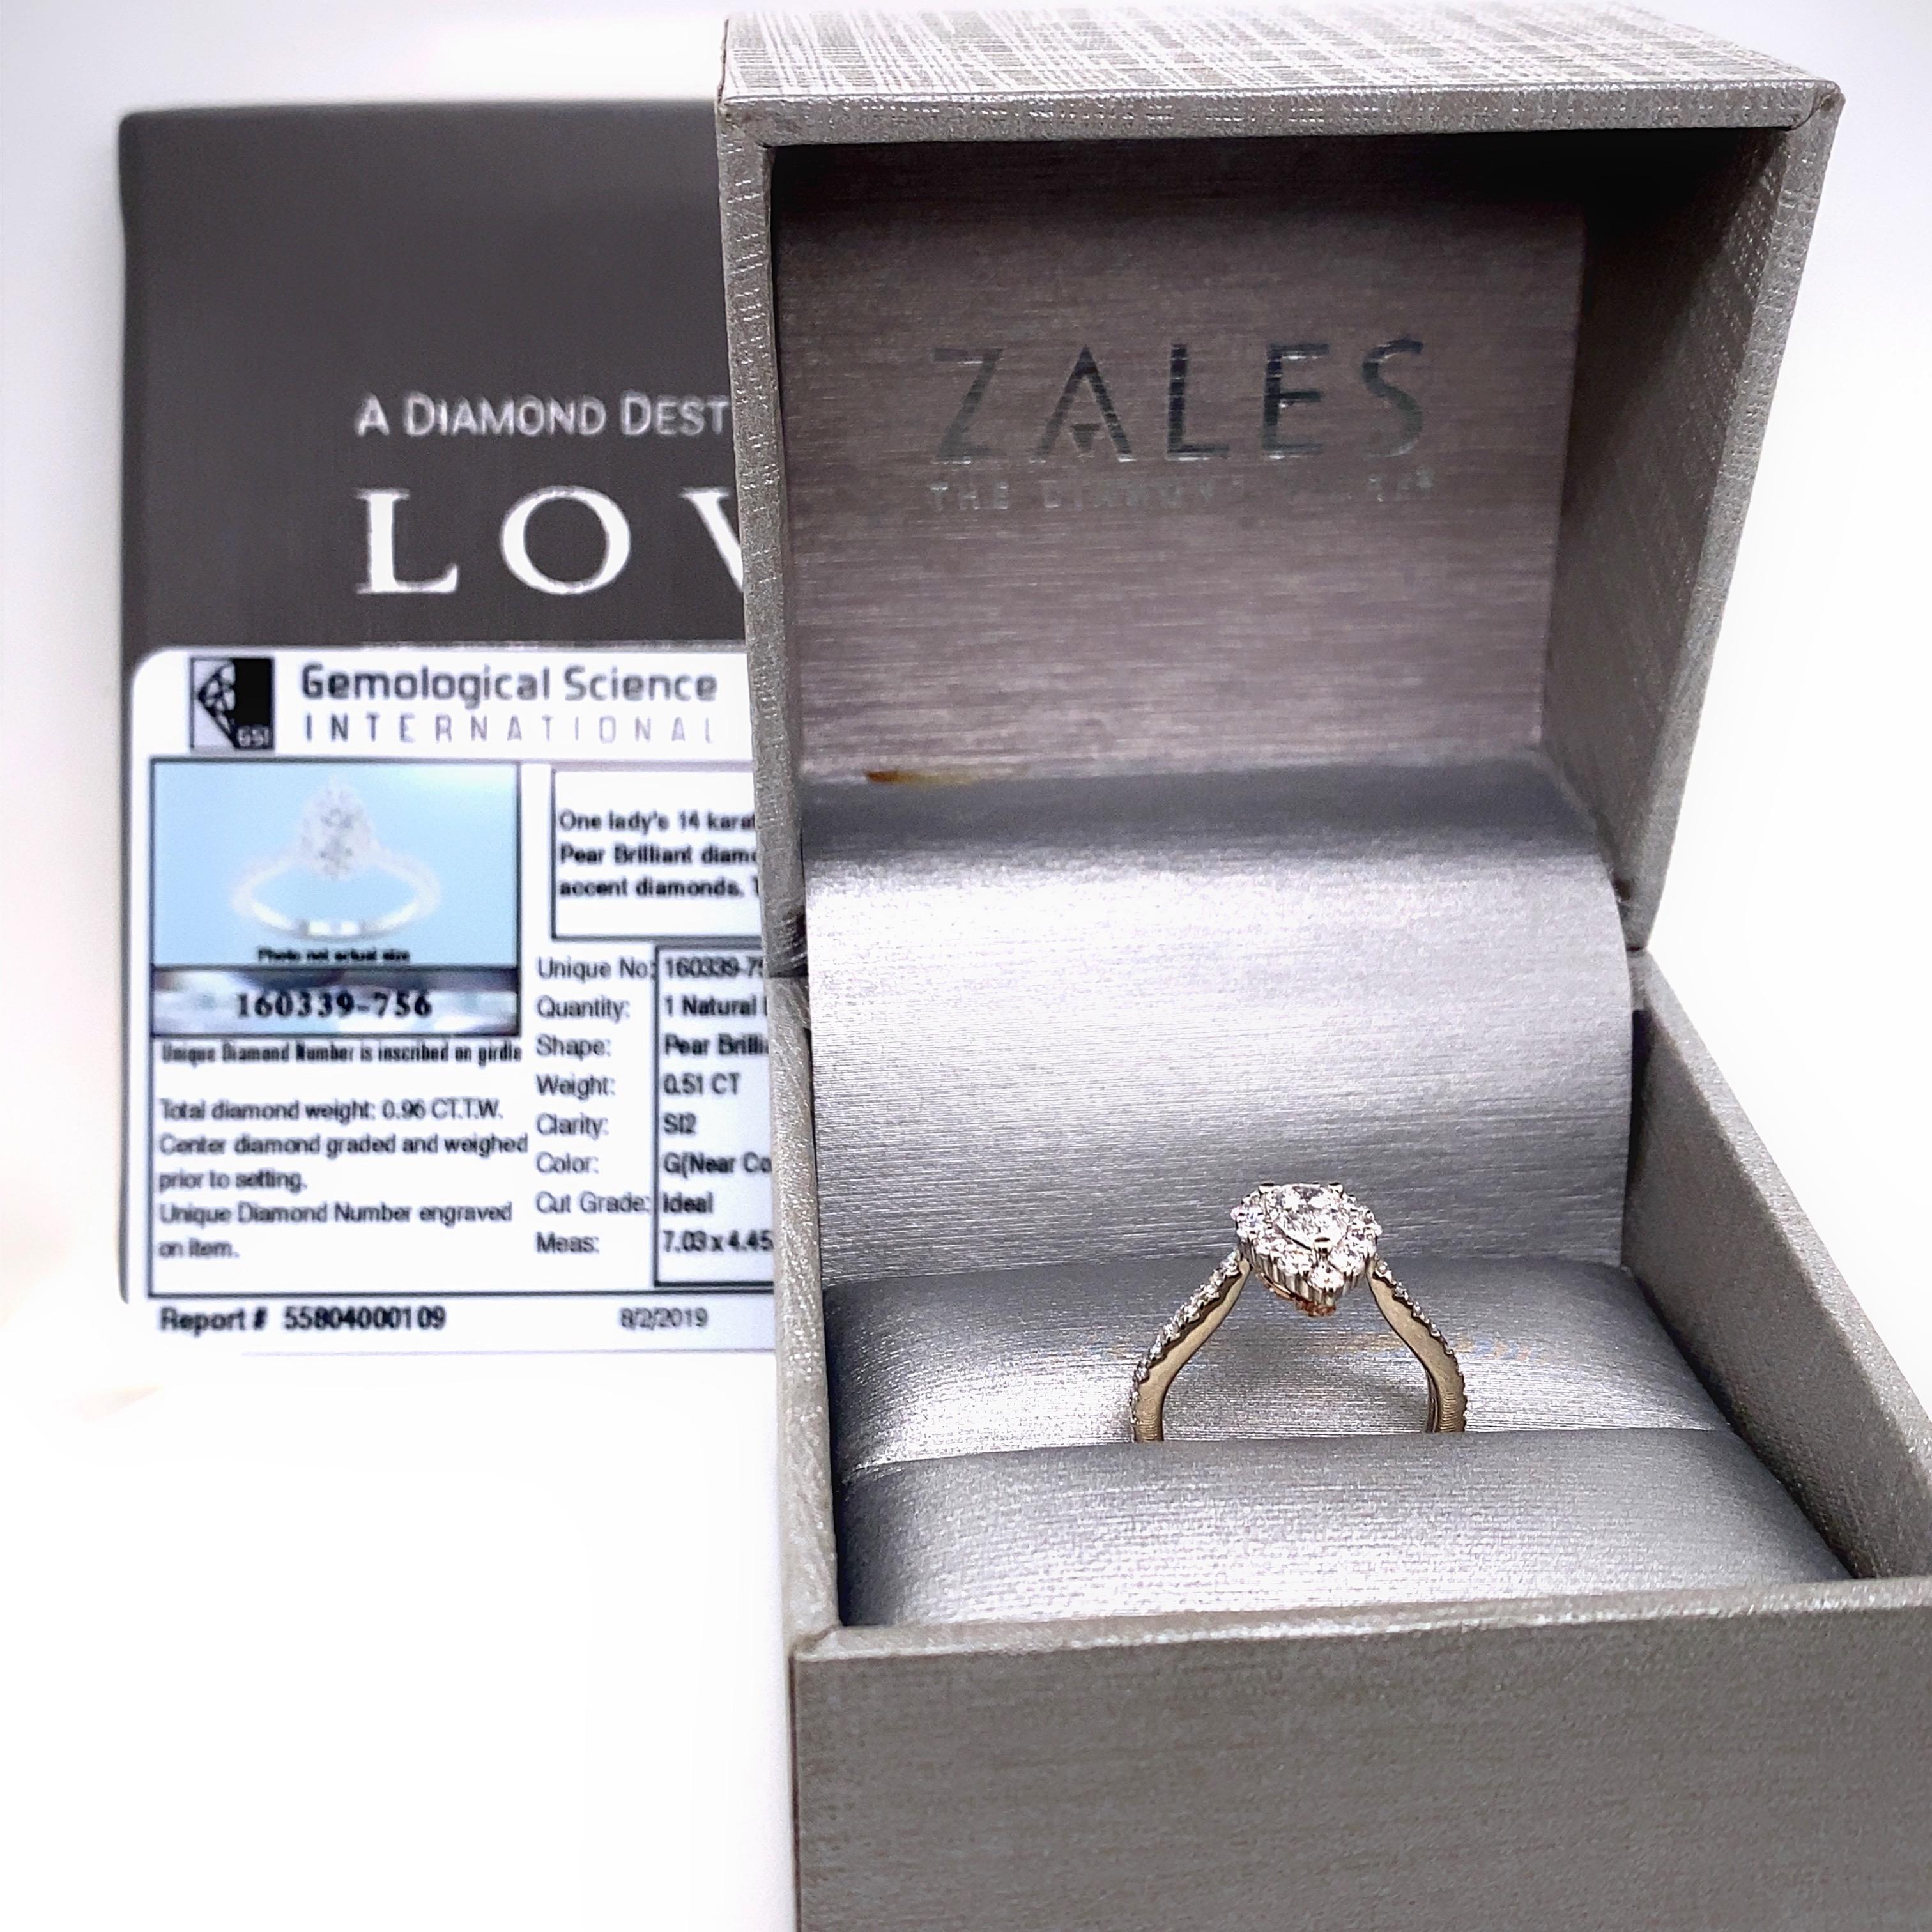 Love's Destiny by Zales Frame Pear Shape Diamond Engagement Ring
Style:  Halo
Ref. number:  Sku# 33254349
Metal:  14kt White Gold with a Rose Gold Buttercup Gallery
Size:  4.25
Measurements:  2 MM Band
TCW:  0.96 tcw
Main Diamond:  Pear Shape